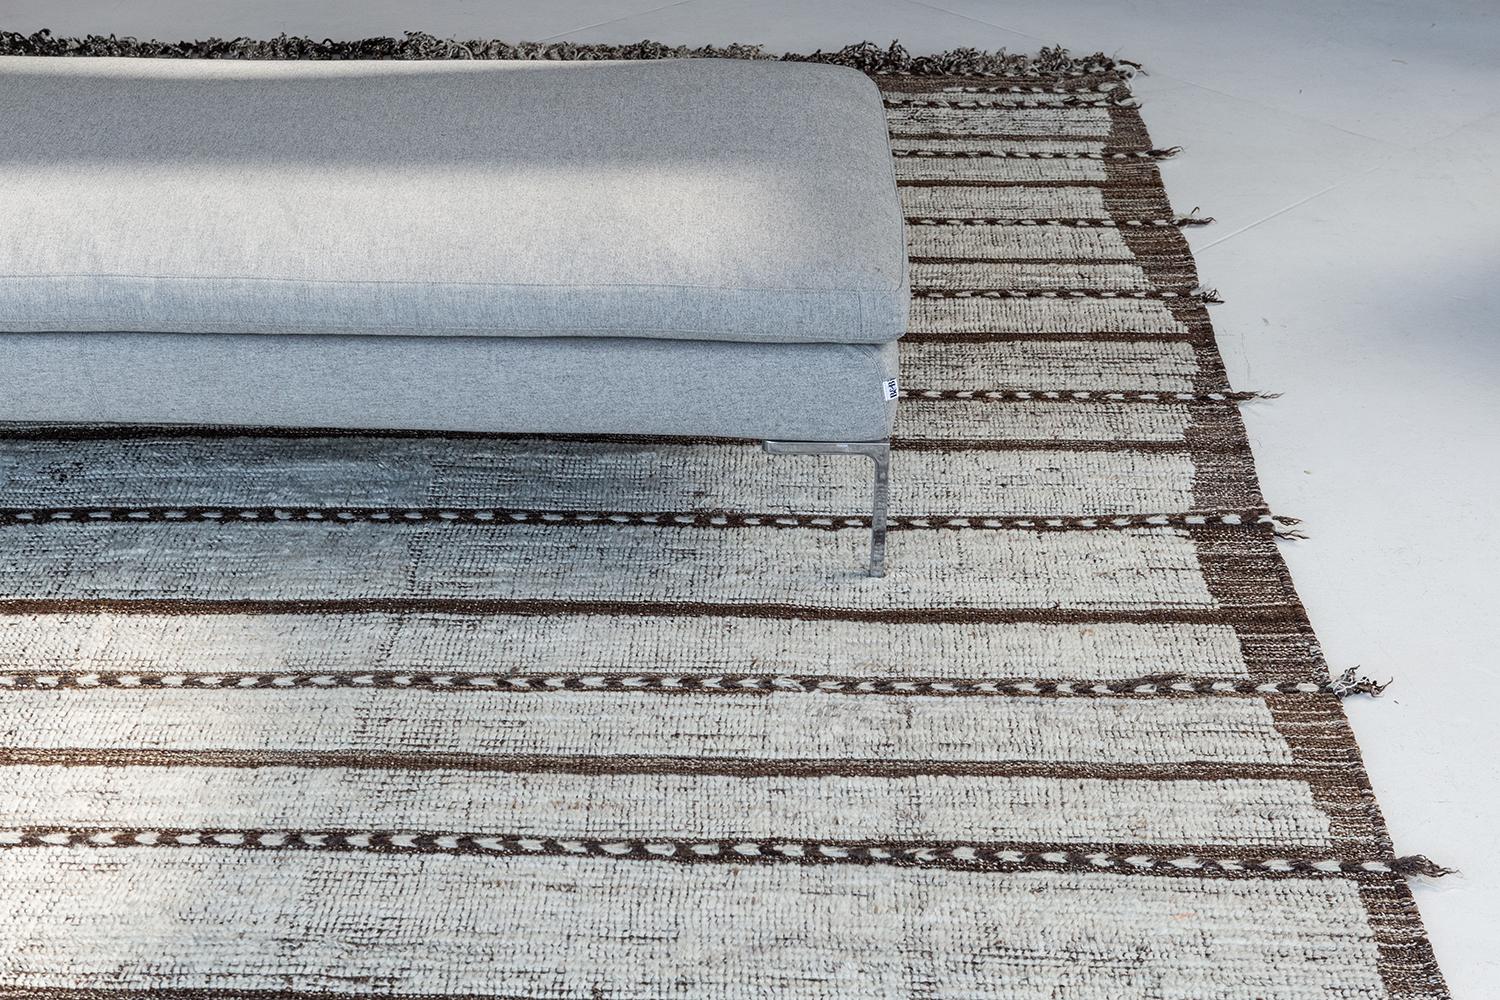 Abrolhos is a handwoven luxurious wool rug with timeless embossed detailing. In addition to its perfect ivory flat weave, Albrohos has a beautiful shag that brings a lustrous texture and contemporary feel to one's space. The Haute Bohemian